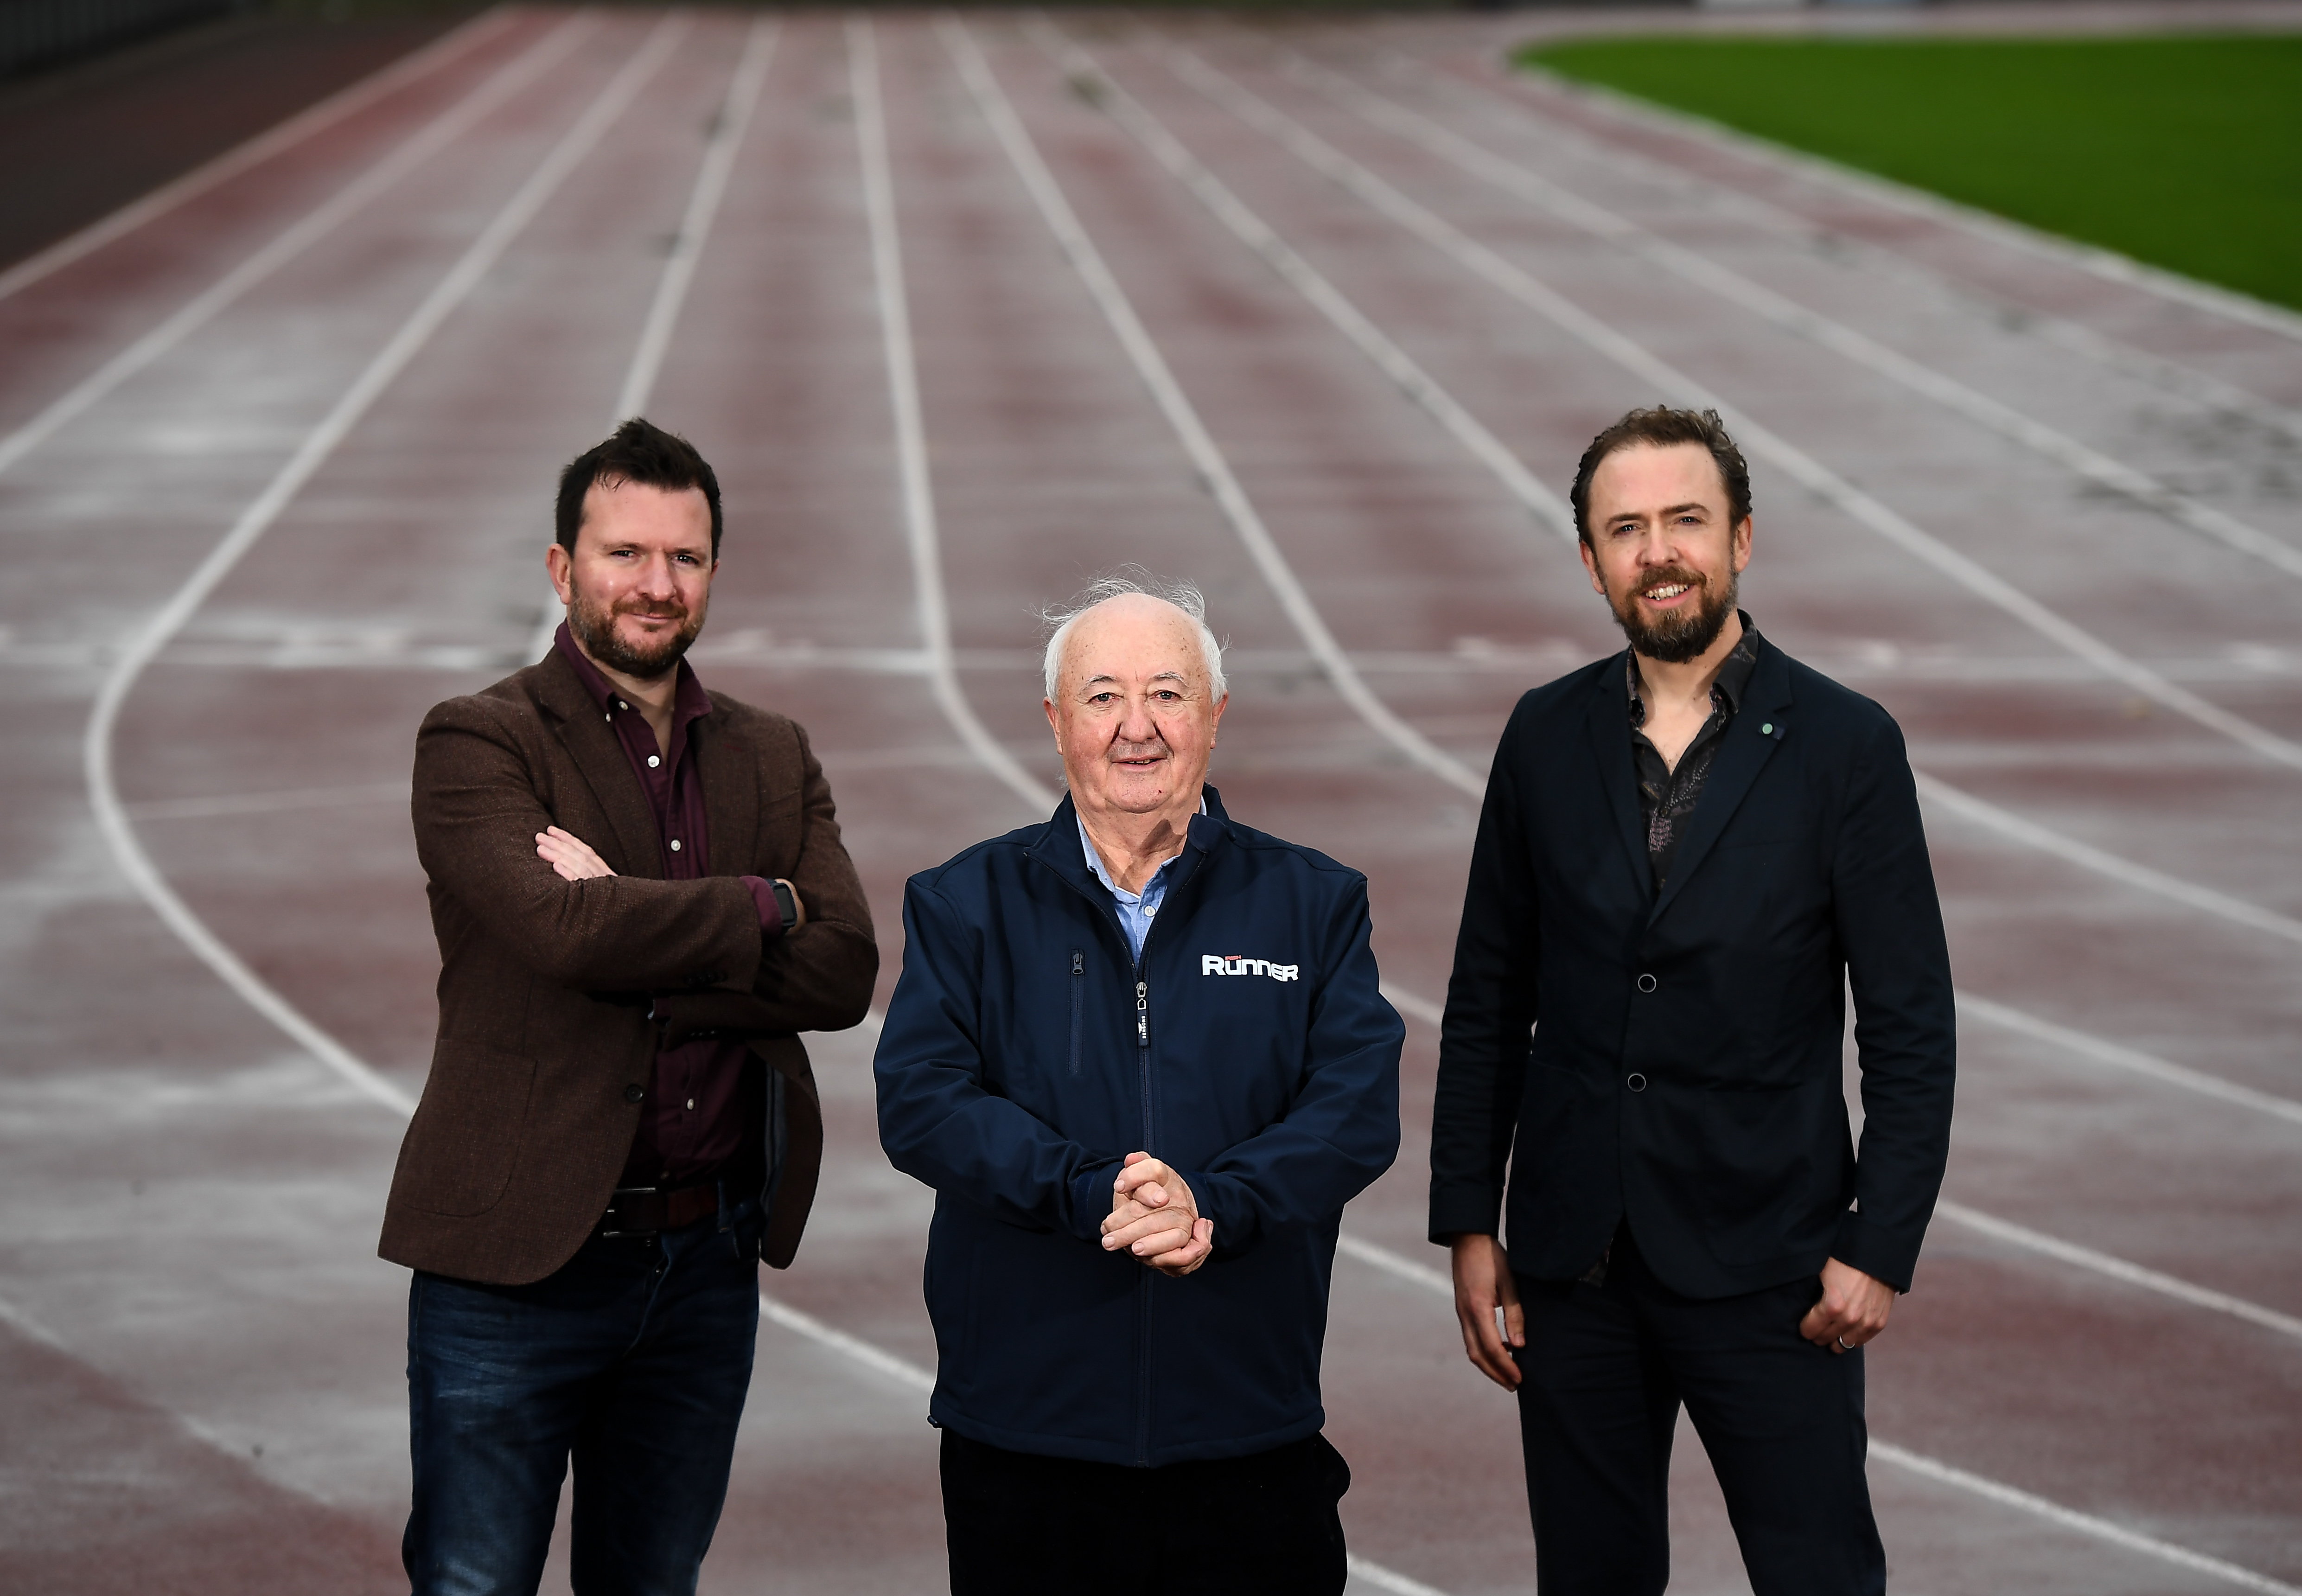 Irish Runner Partners With Record Media For New Chapter